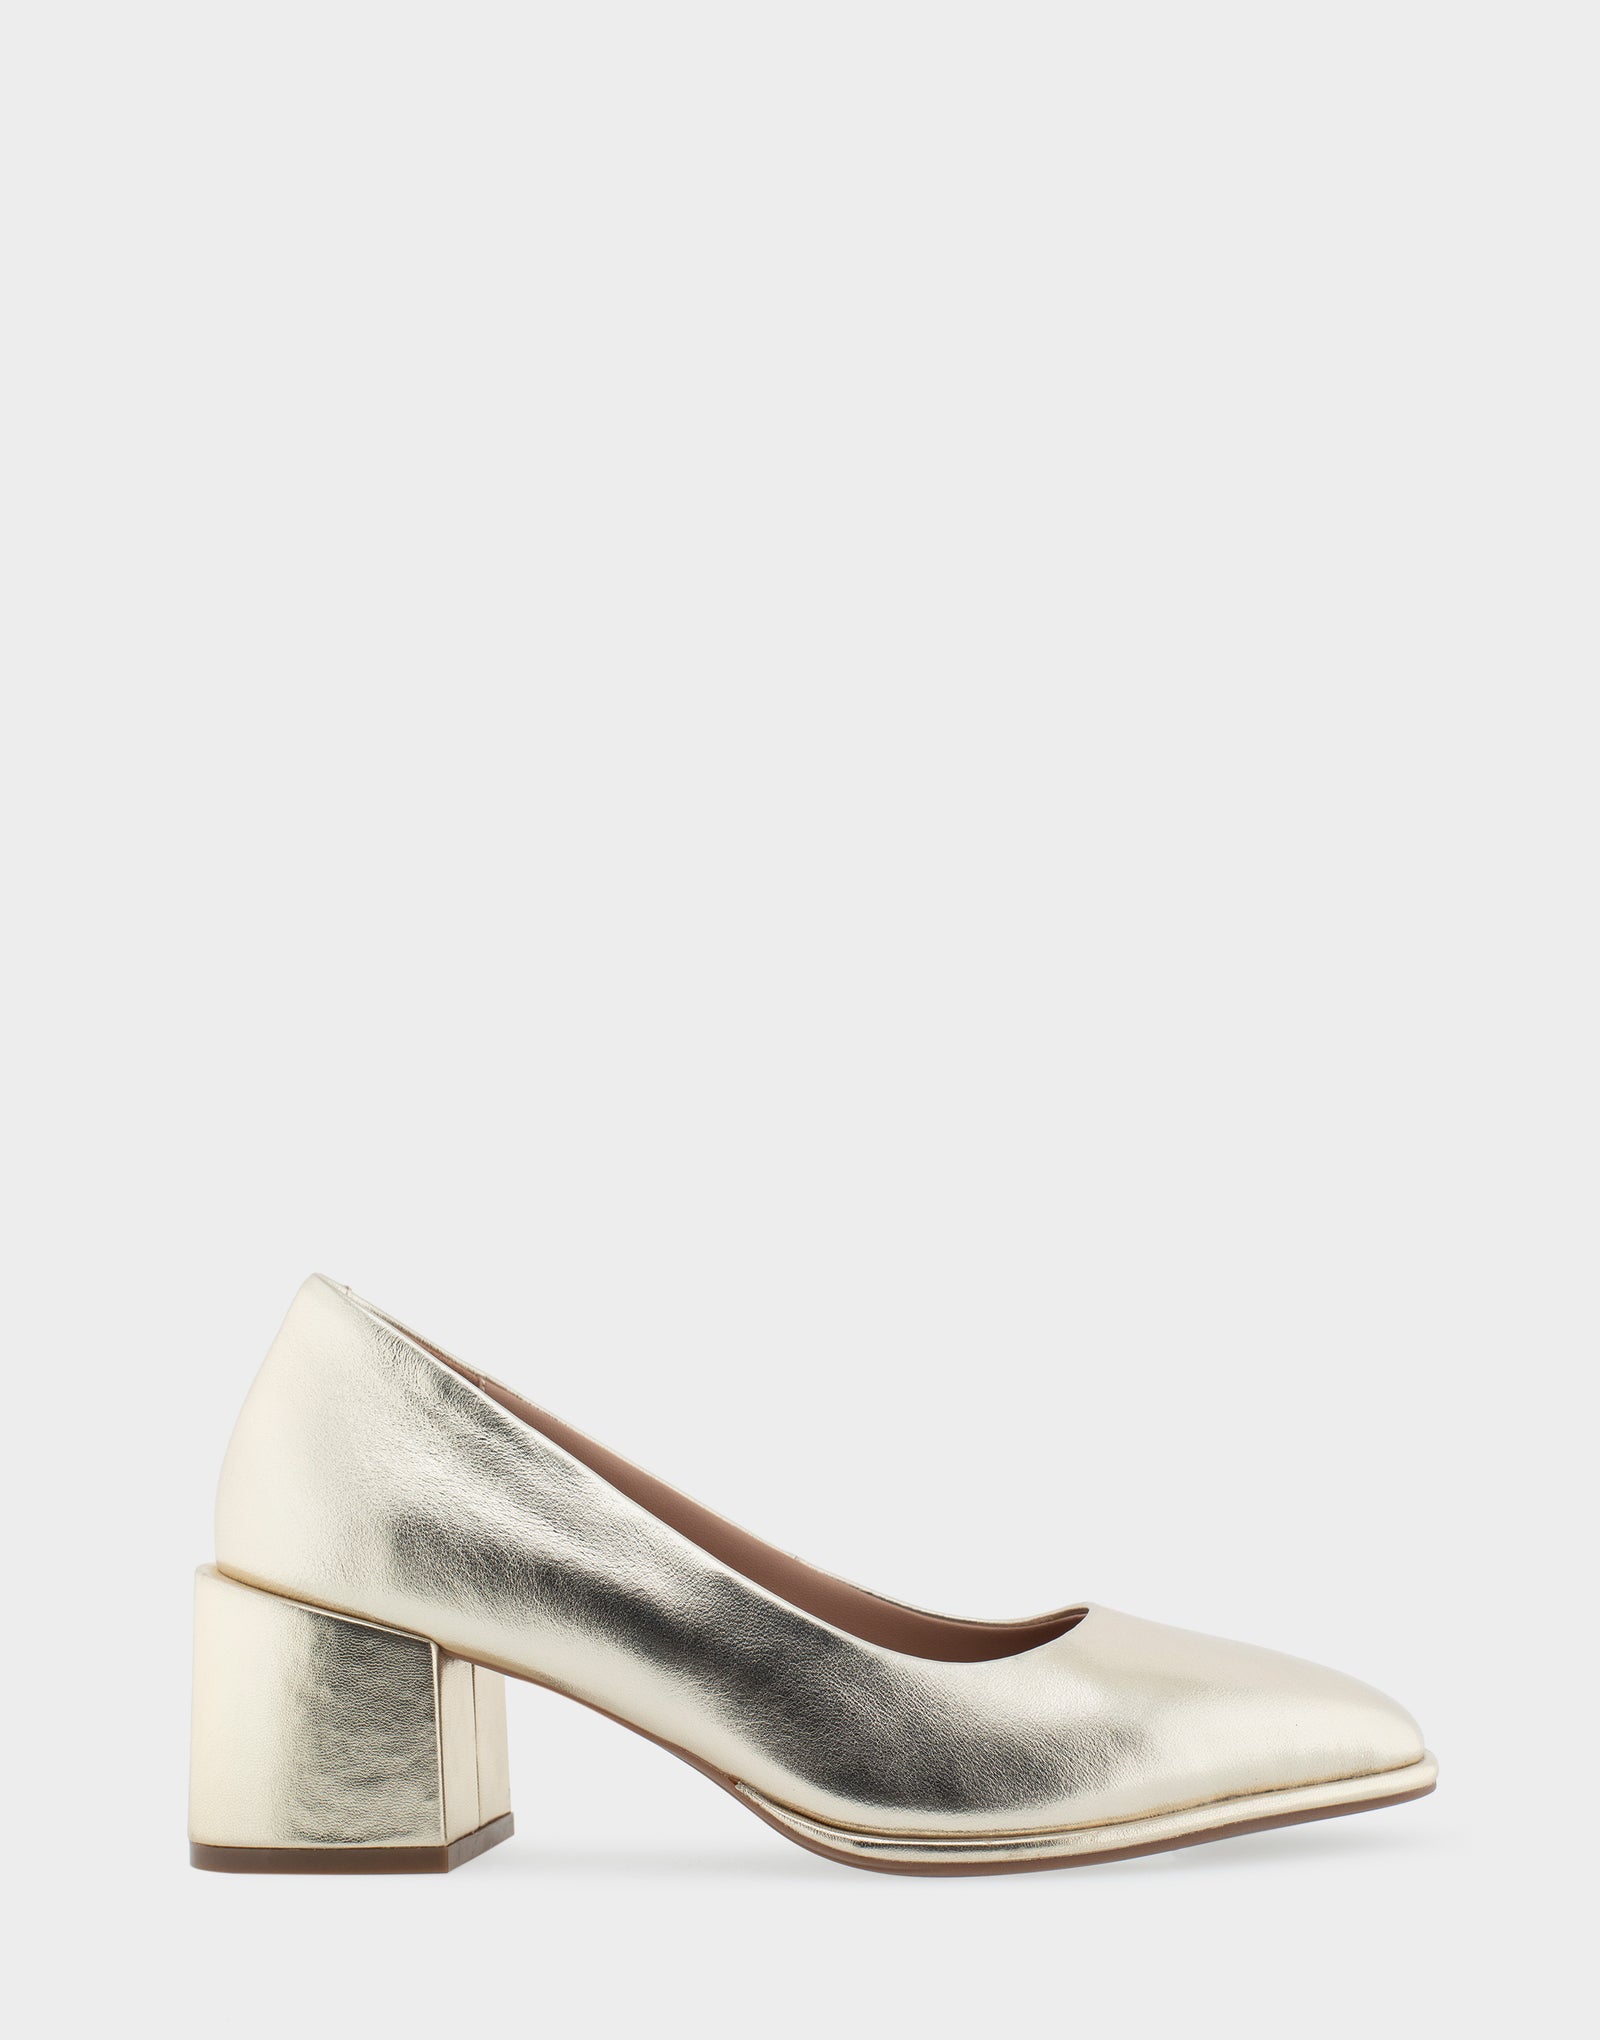 Cone Heel Courtshoes with gold tip - Shop Hanthoss